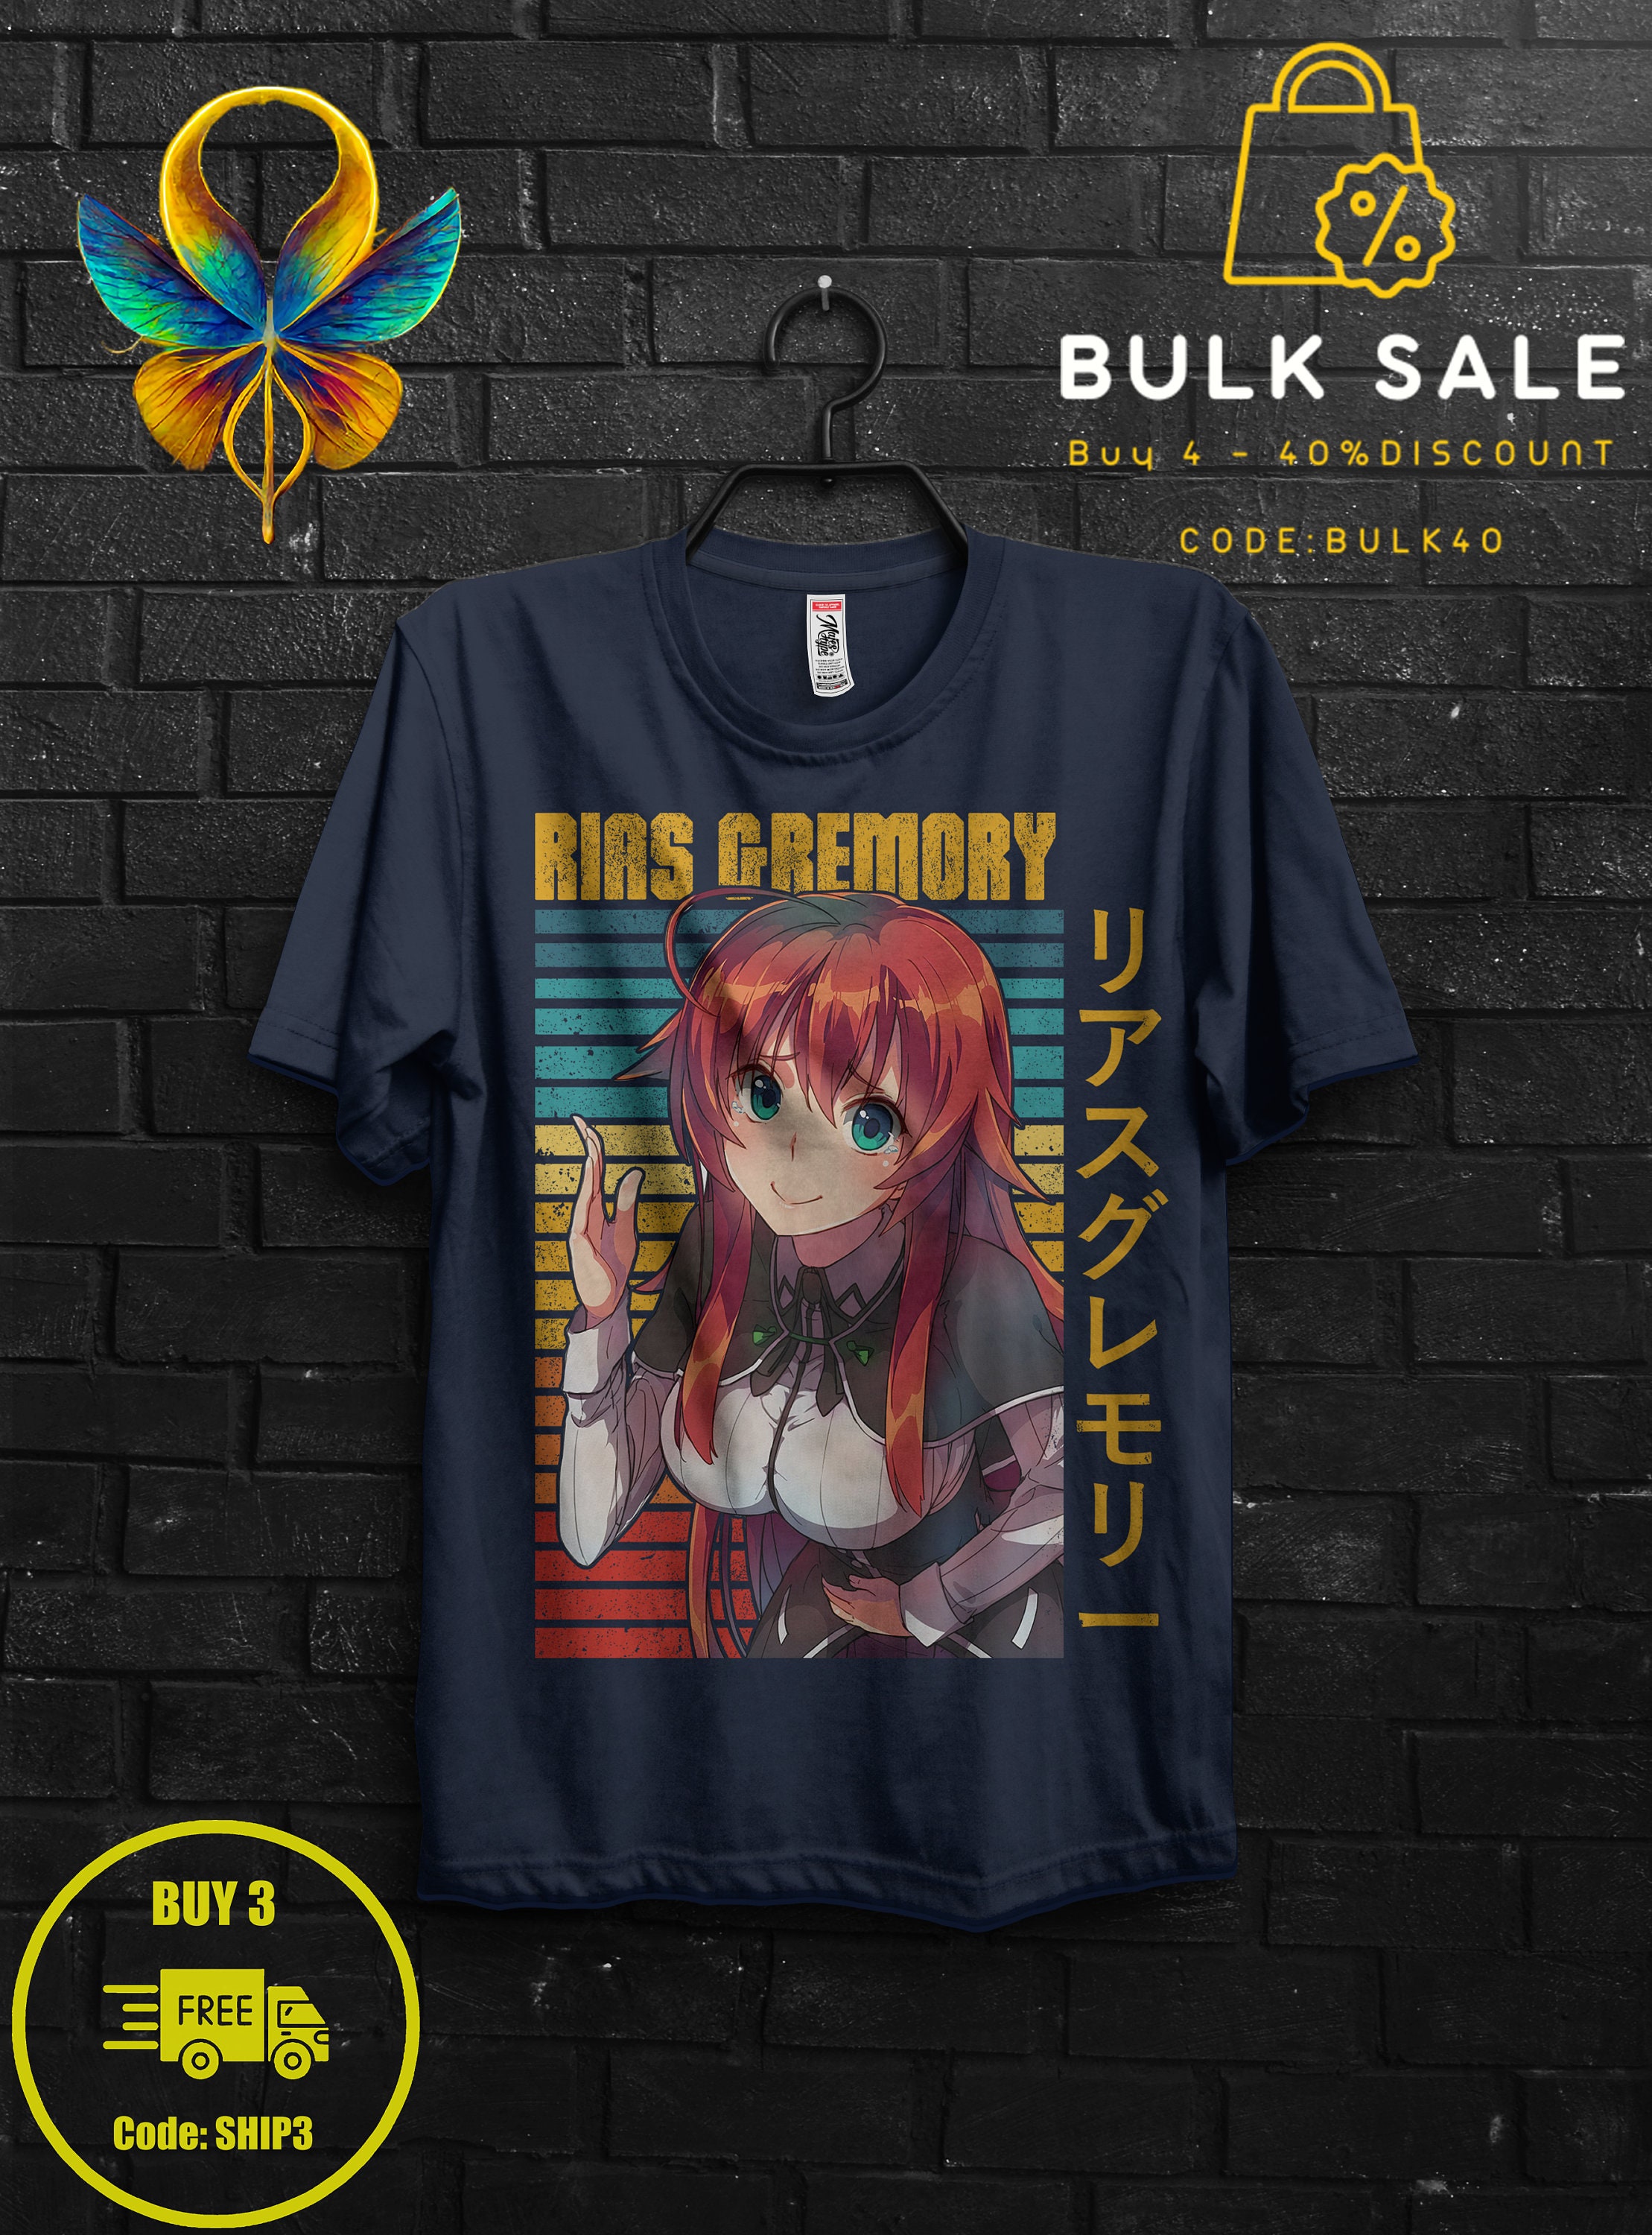 Rias Gremory Shirt Anime Gift Cosplay For Girl,Issei Hyoudou Sweat,Rossweisse Tshirt For Sitri,Xenovia Appareal For Her,High School DxD Tee 1600247823